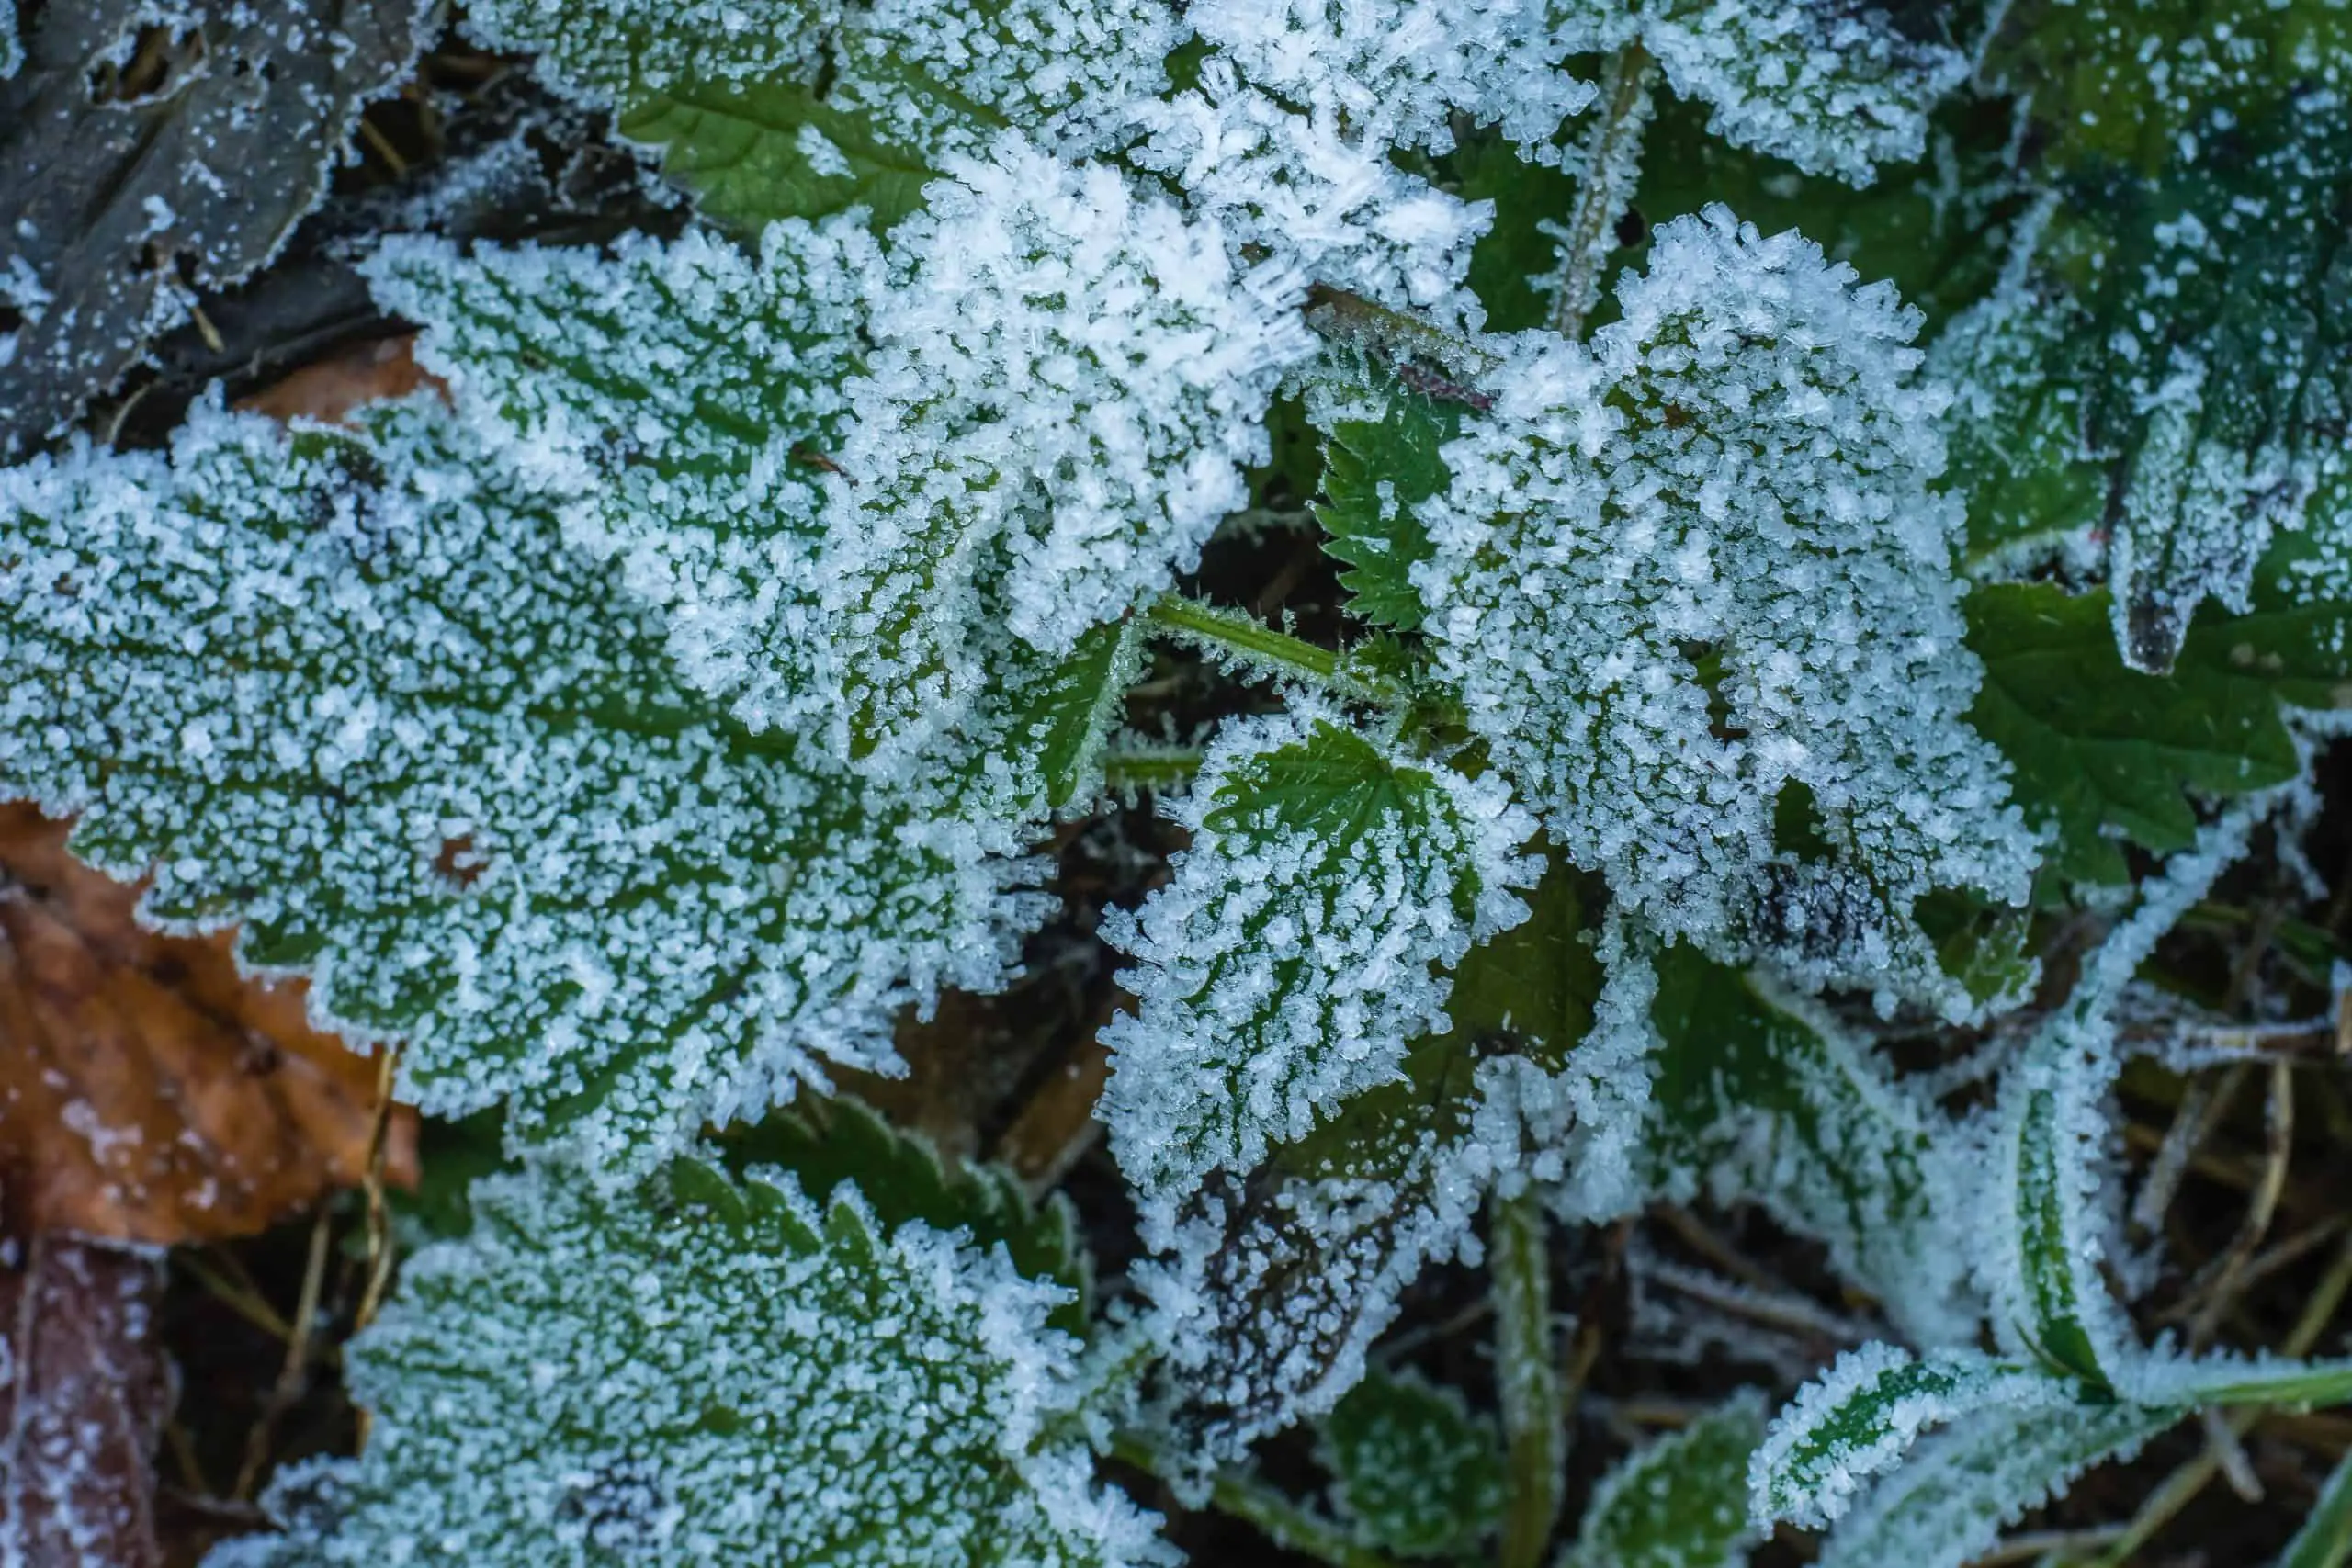 Stinging nettles in winter unfazed by the cold